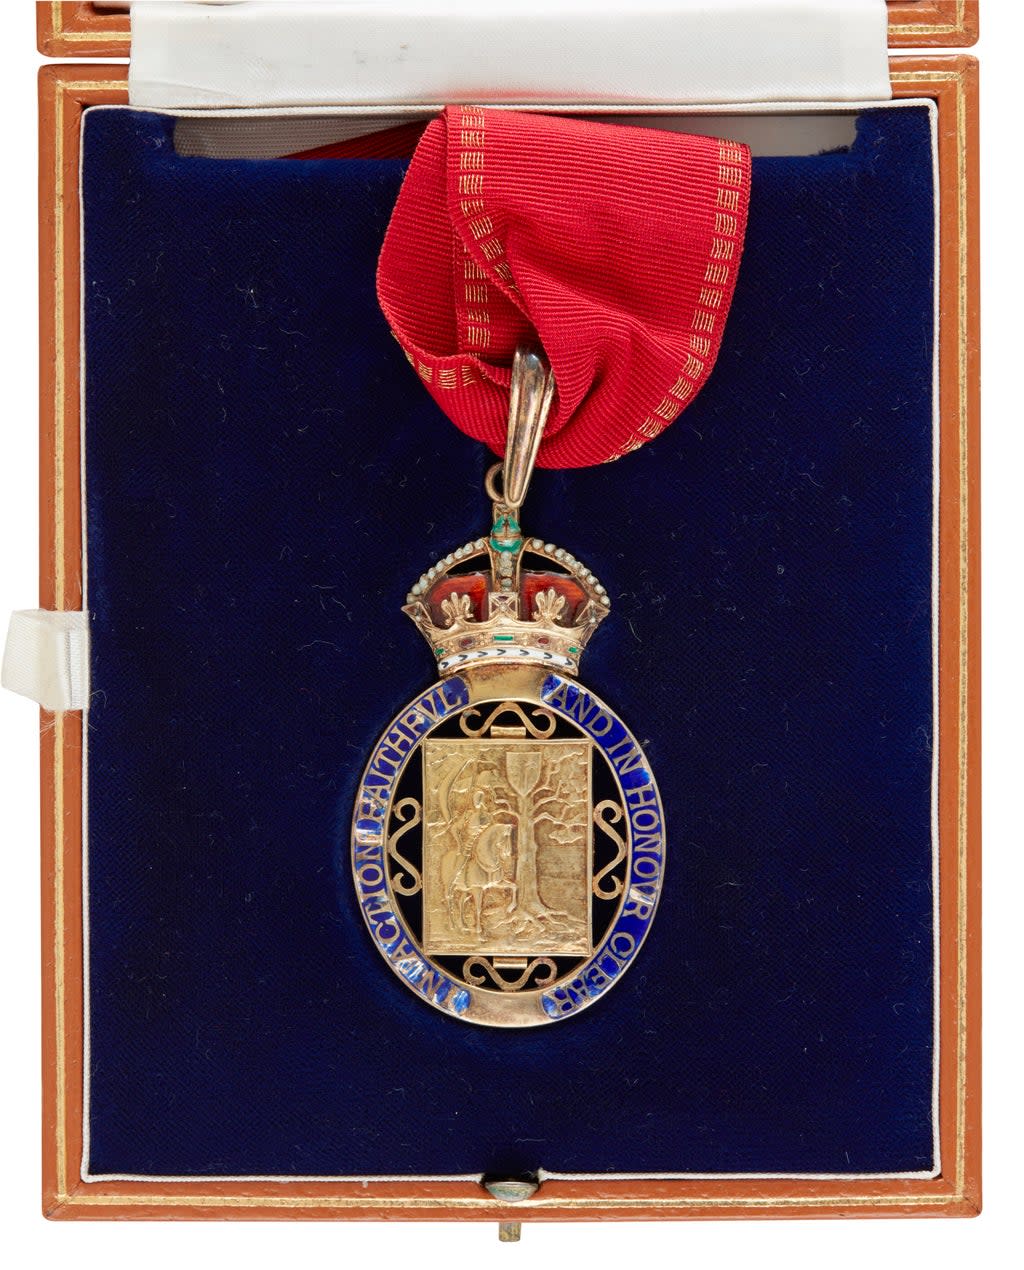 A Companion of Honour medal (Sotheby’s/PA) (PA Media)